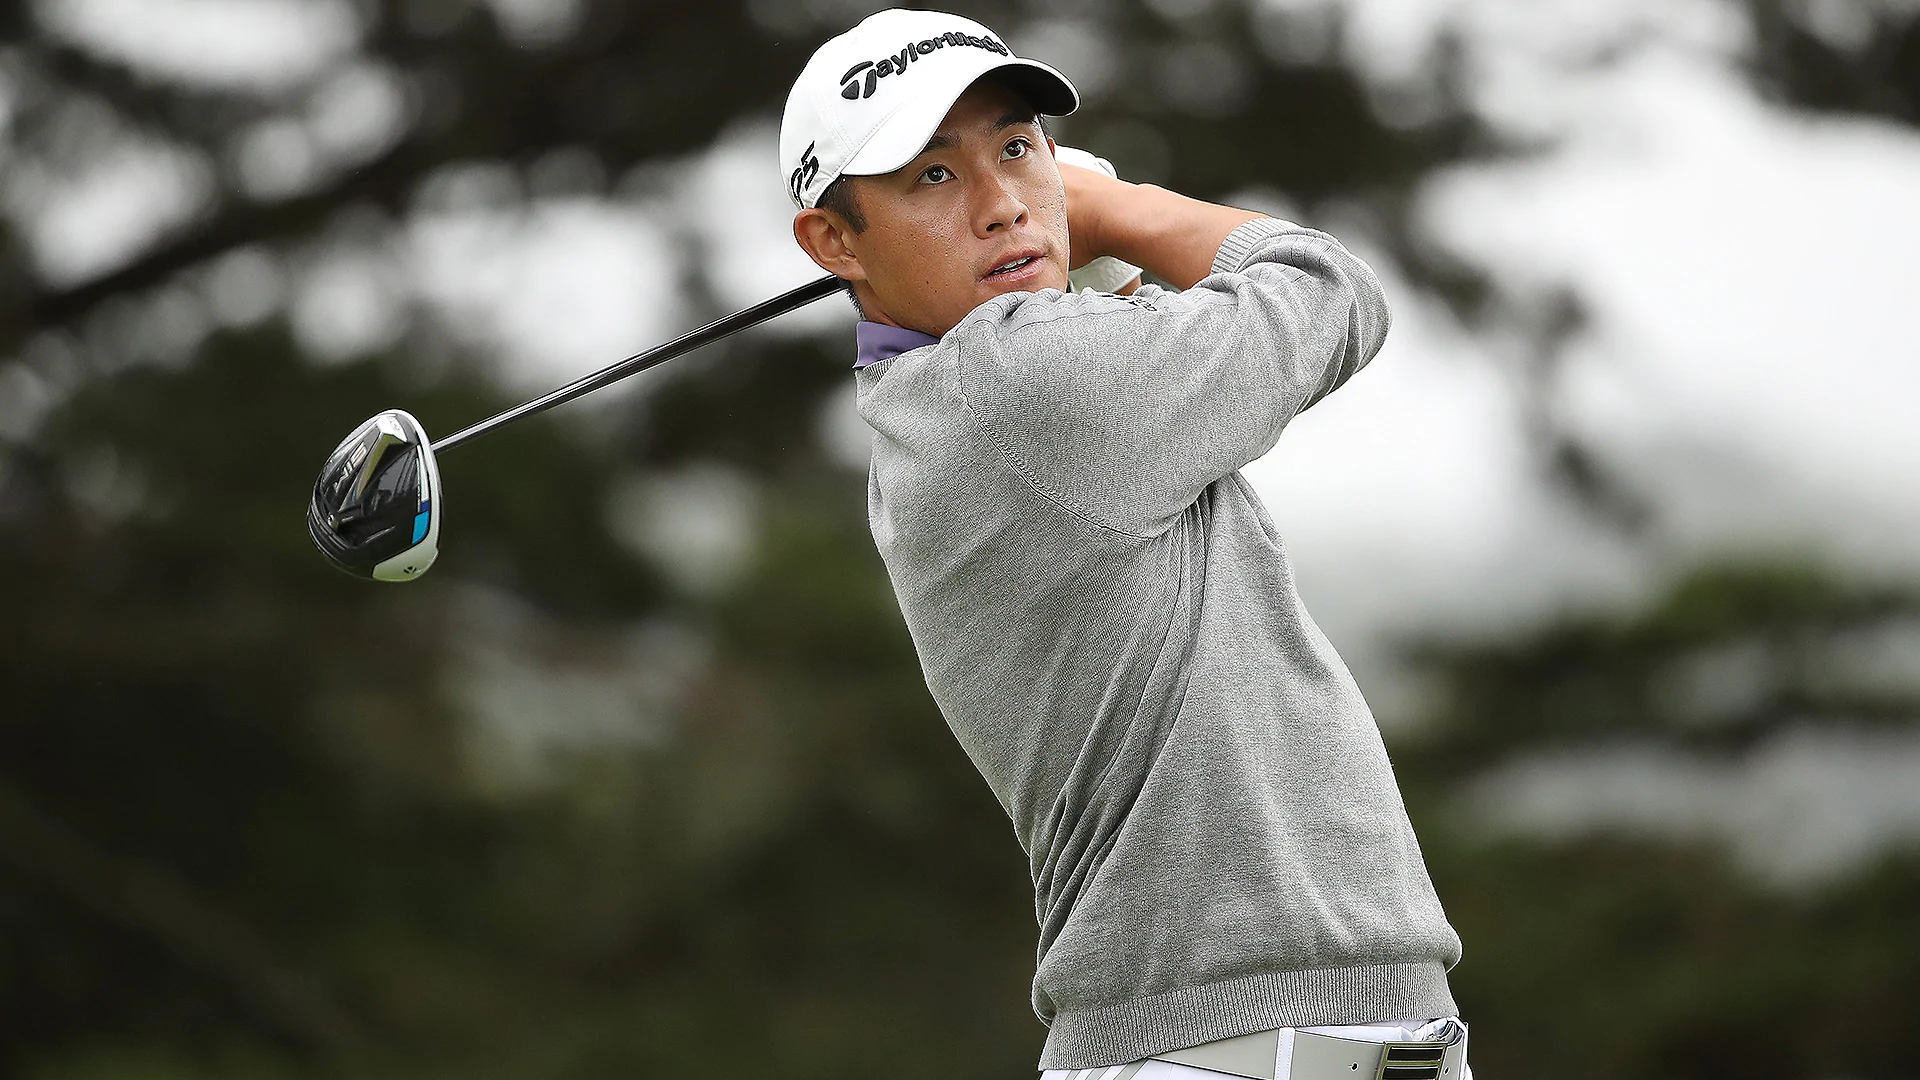 Why Collin Morikawa’s heroic drive at 16 almost never happened